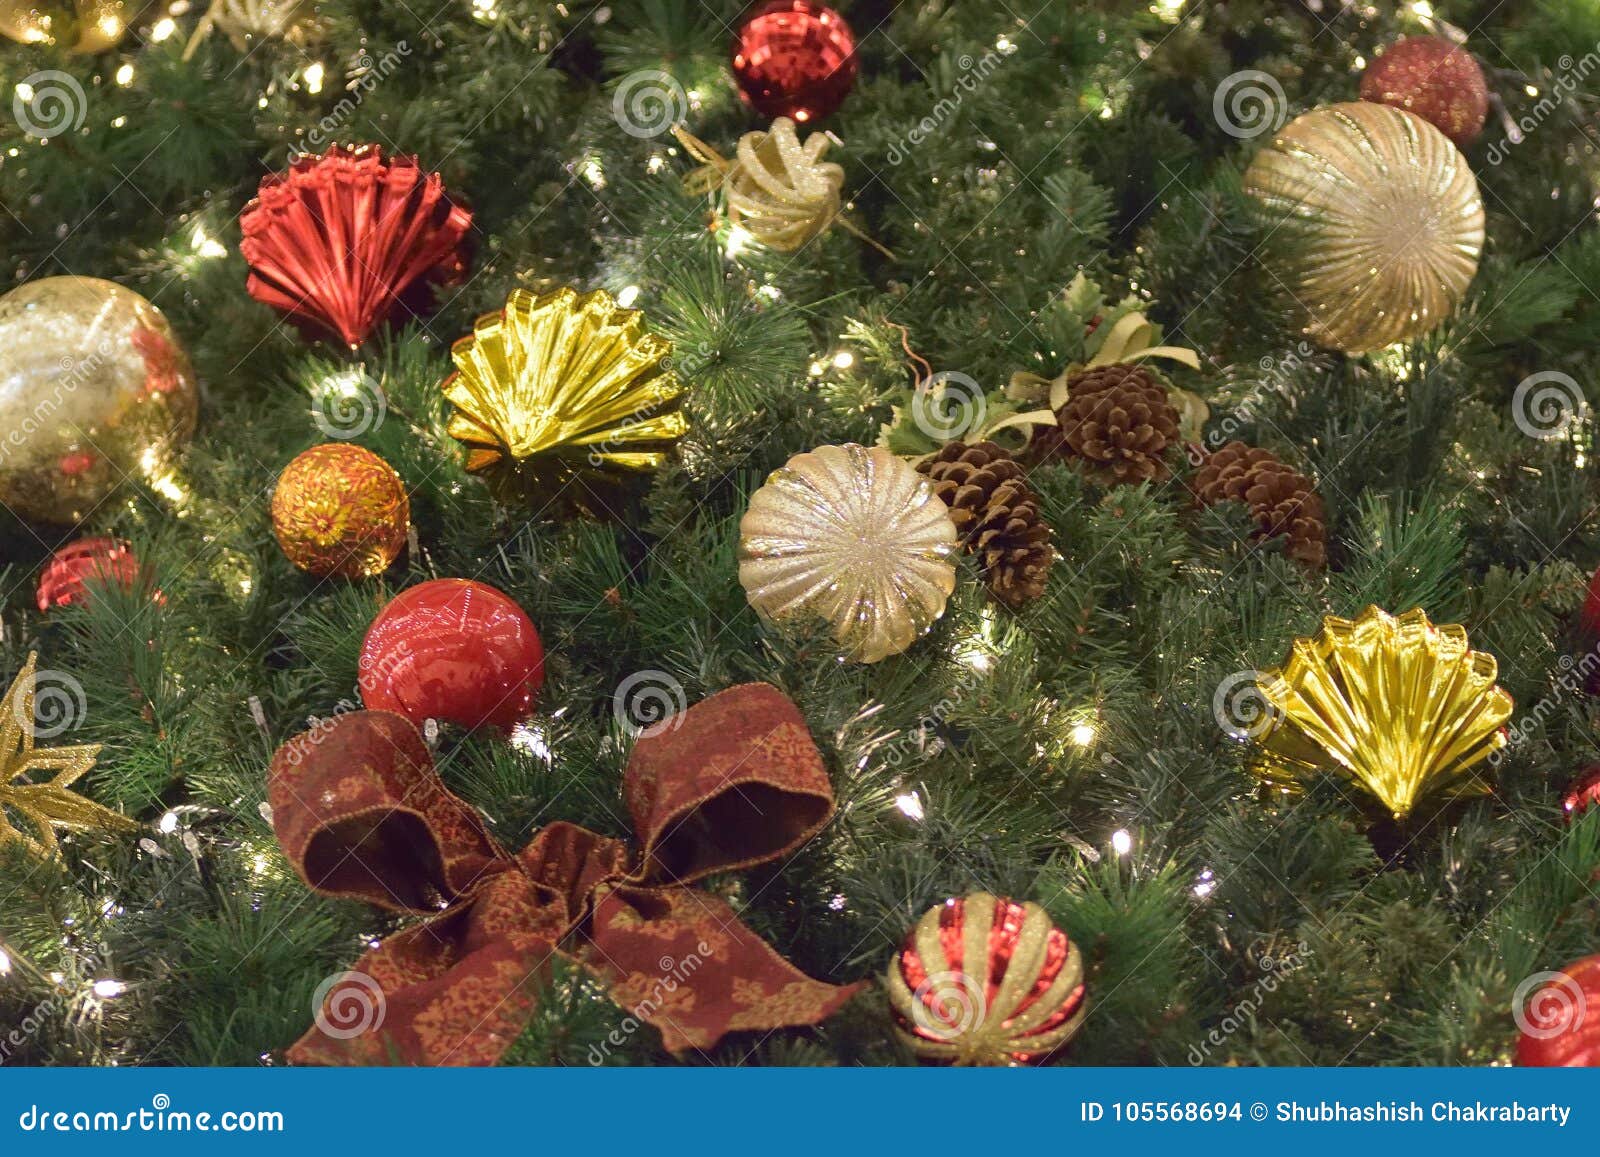 Background Texture of Christmas Tree Decorations Stock Photo - Image of ...